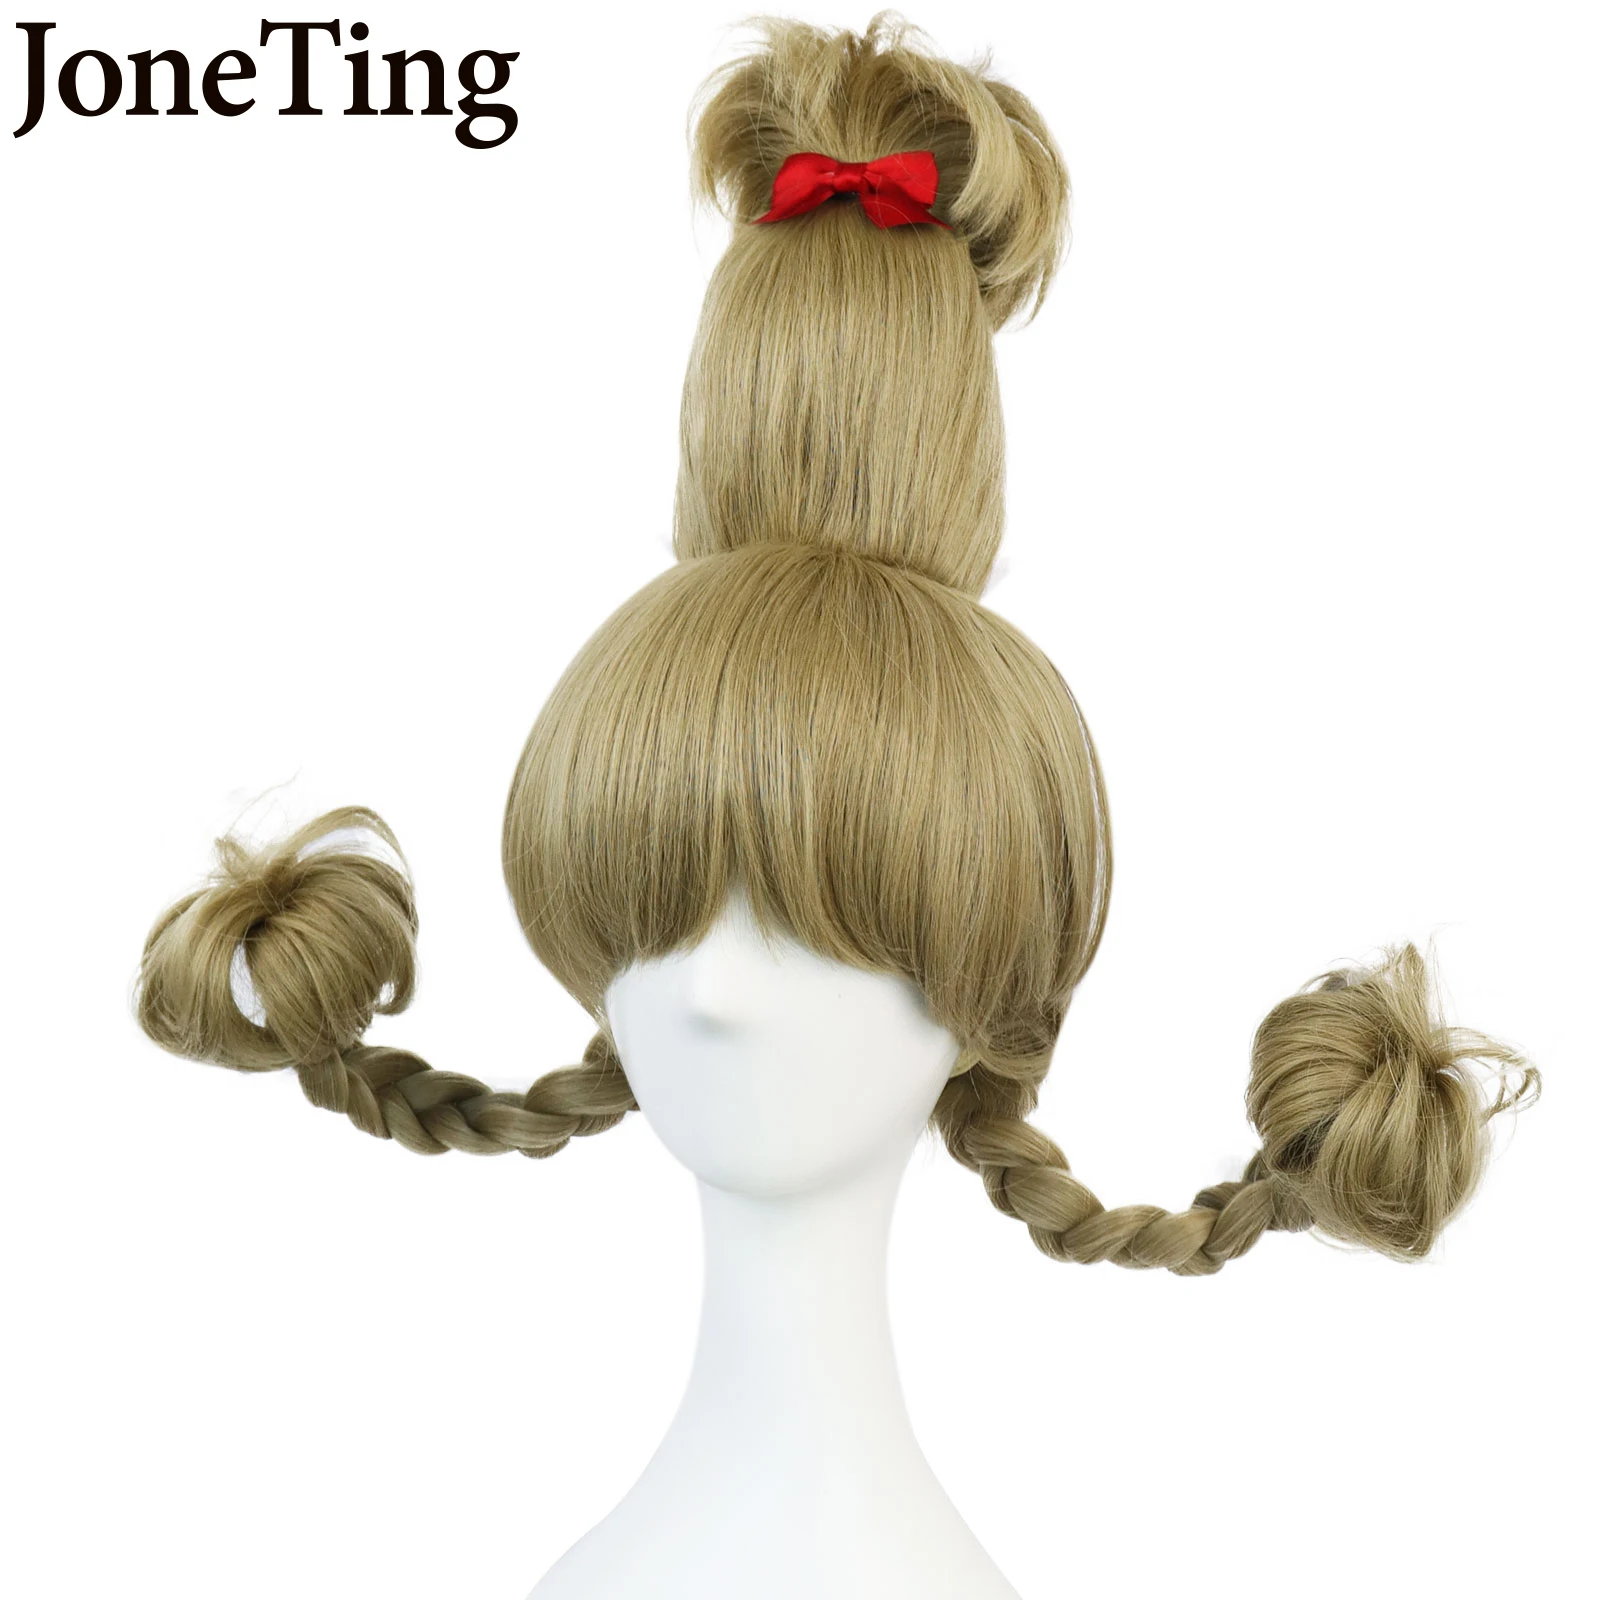 JoneTing Synthetic Green Pigtail Cosplay Wig with Bangs Red butterfly Hair Clips The Grinch Green Monster For Halloween costume